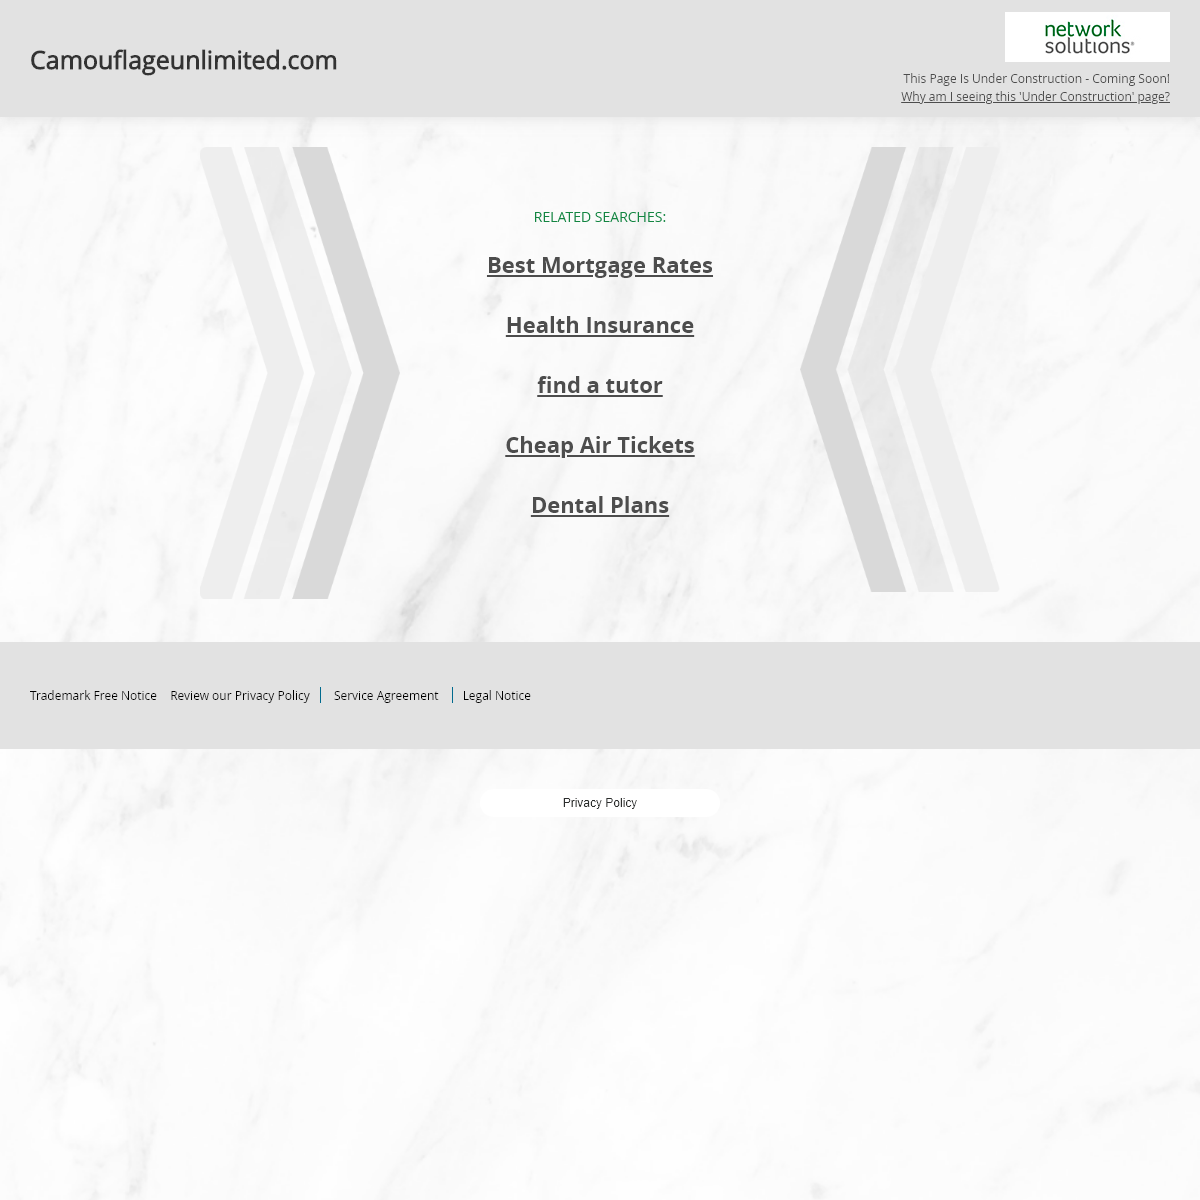 A complete backup of camouflageunlimited.com